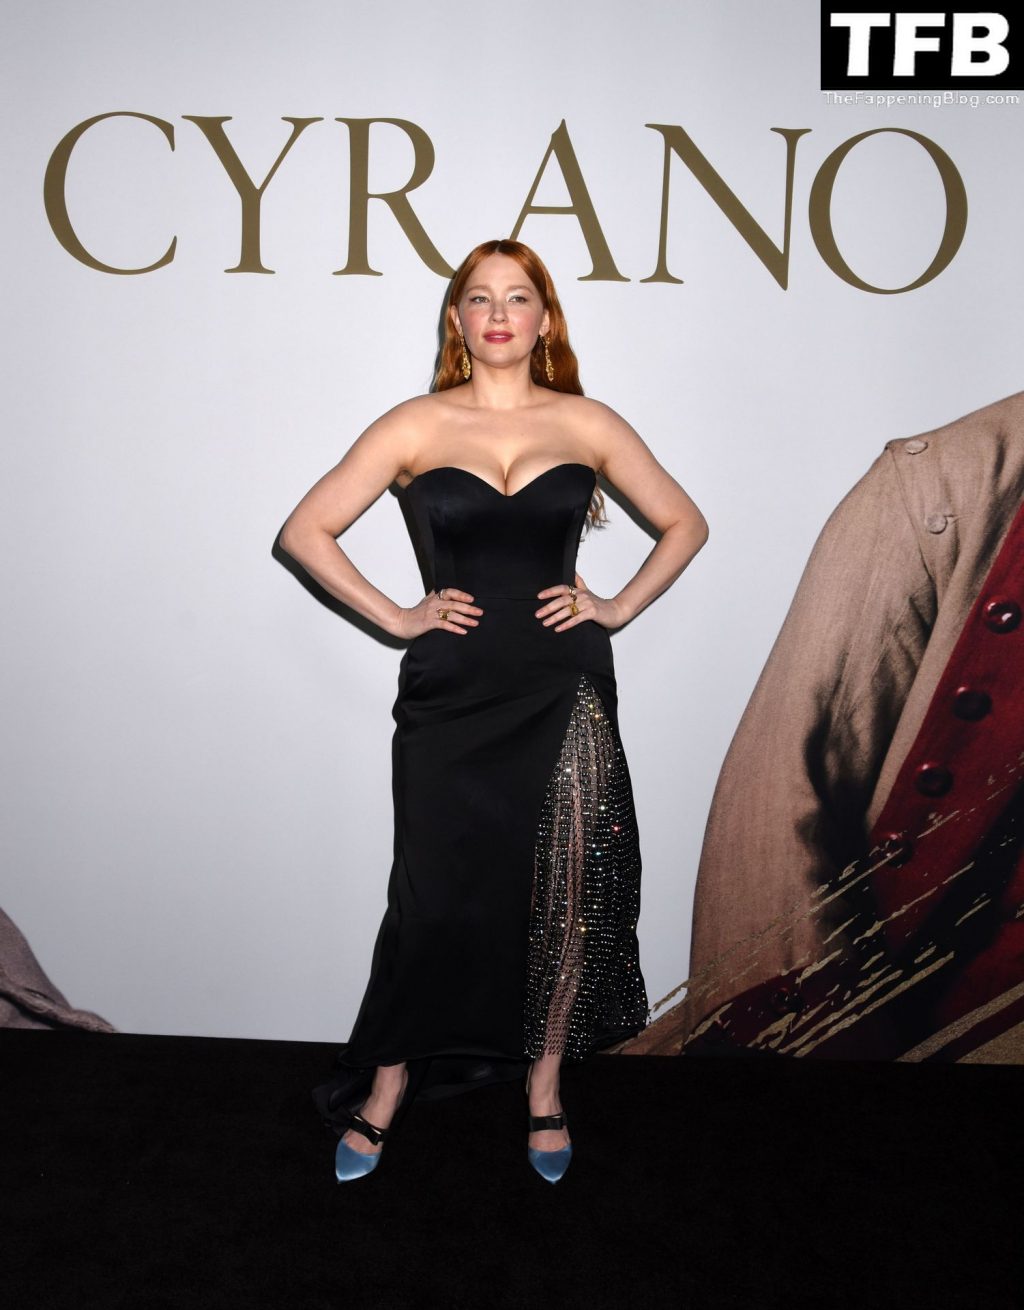 Haley Bennett Sexy The Fappening Blog 21 1024x1310 - Haley Bennett Shows Off Her Sexy Boobs at the Premiere of “Cyrano” in NYC (43 Photos)